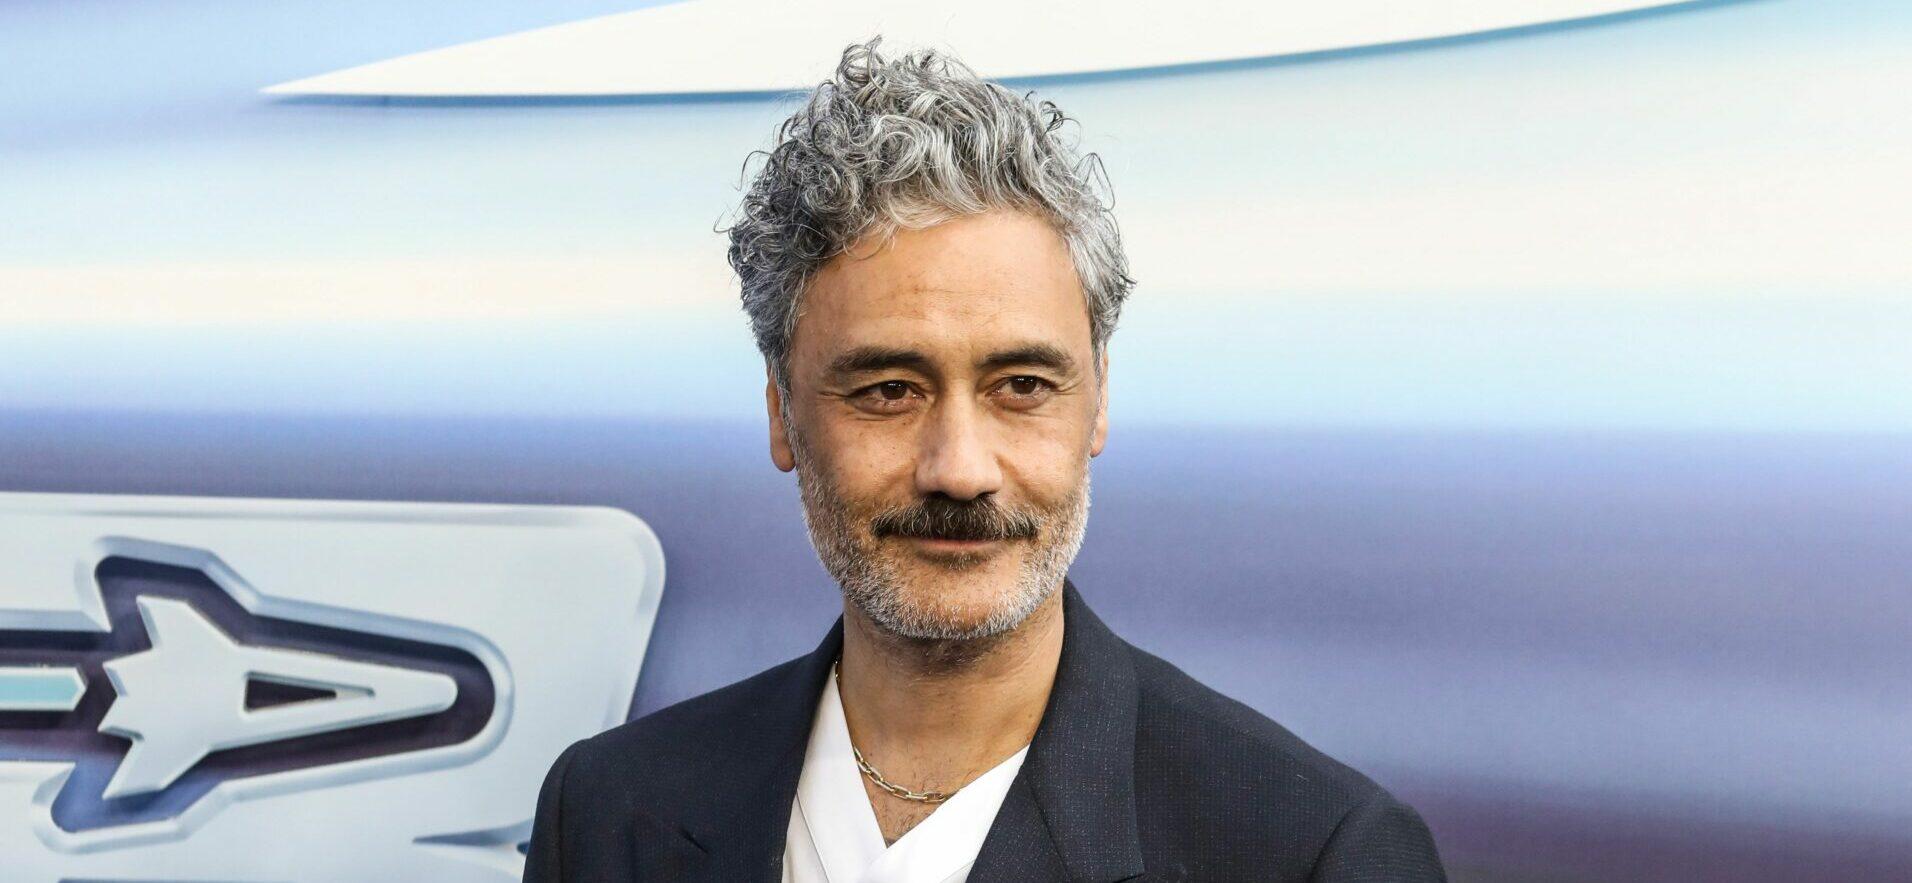 Taika Waititi Wants To Star In His Own ‘Star Wars’ Movie